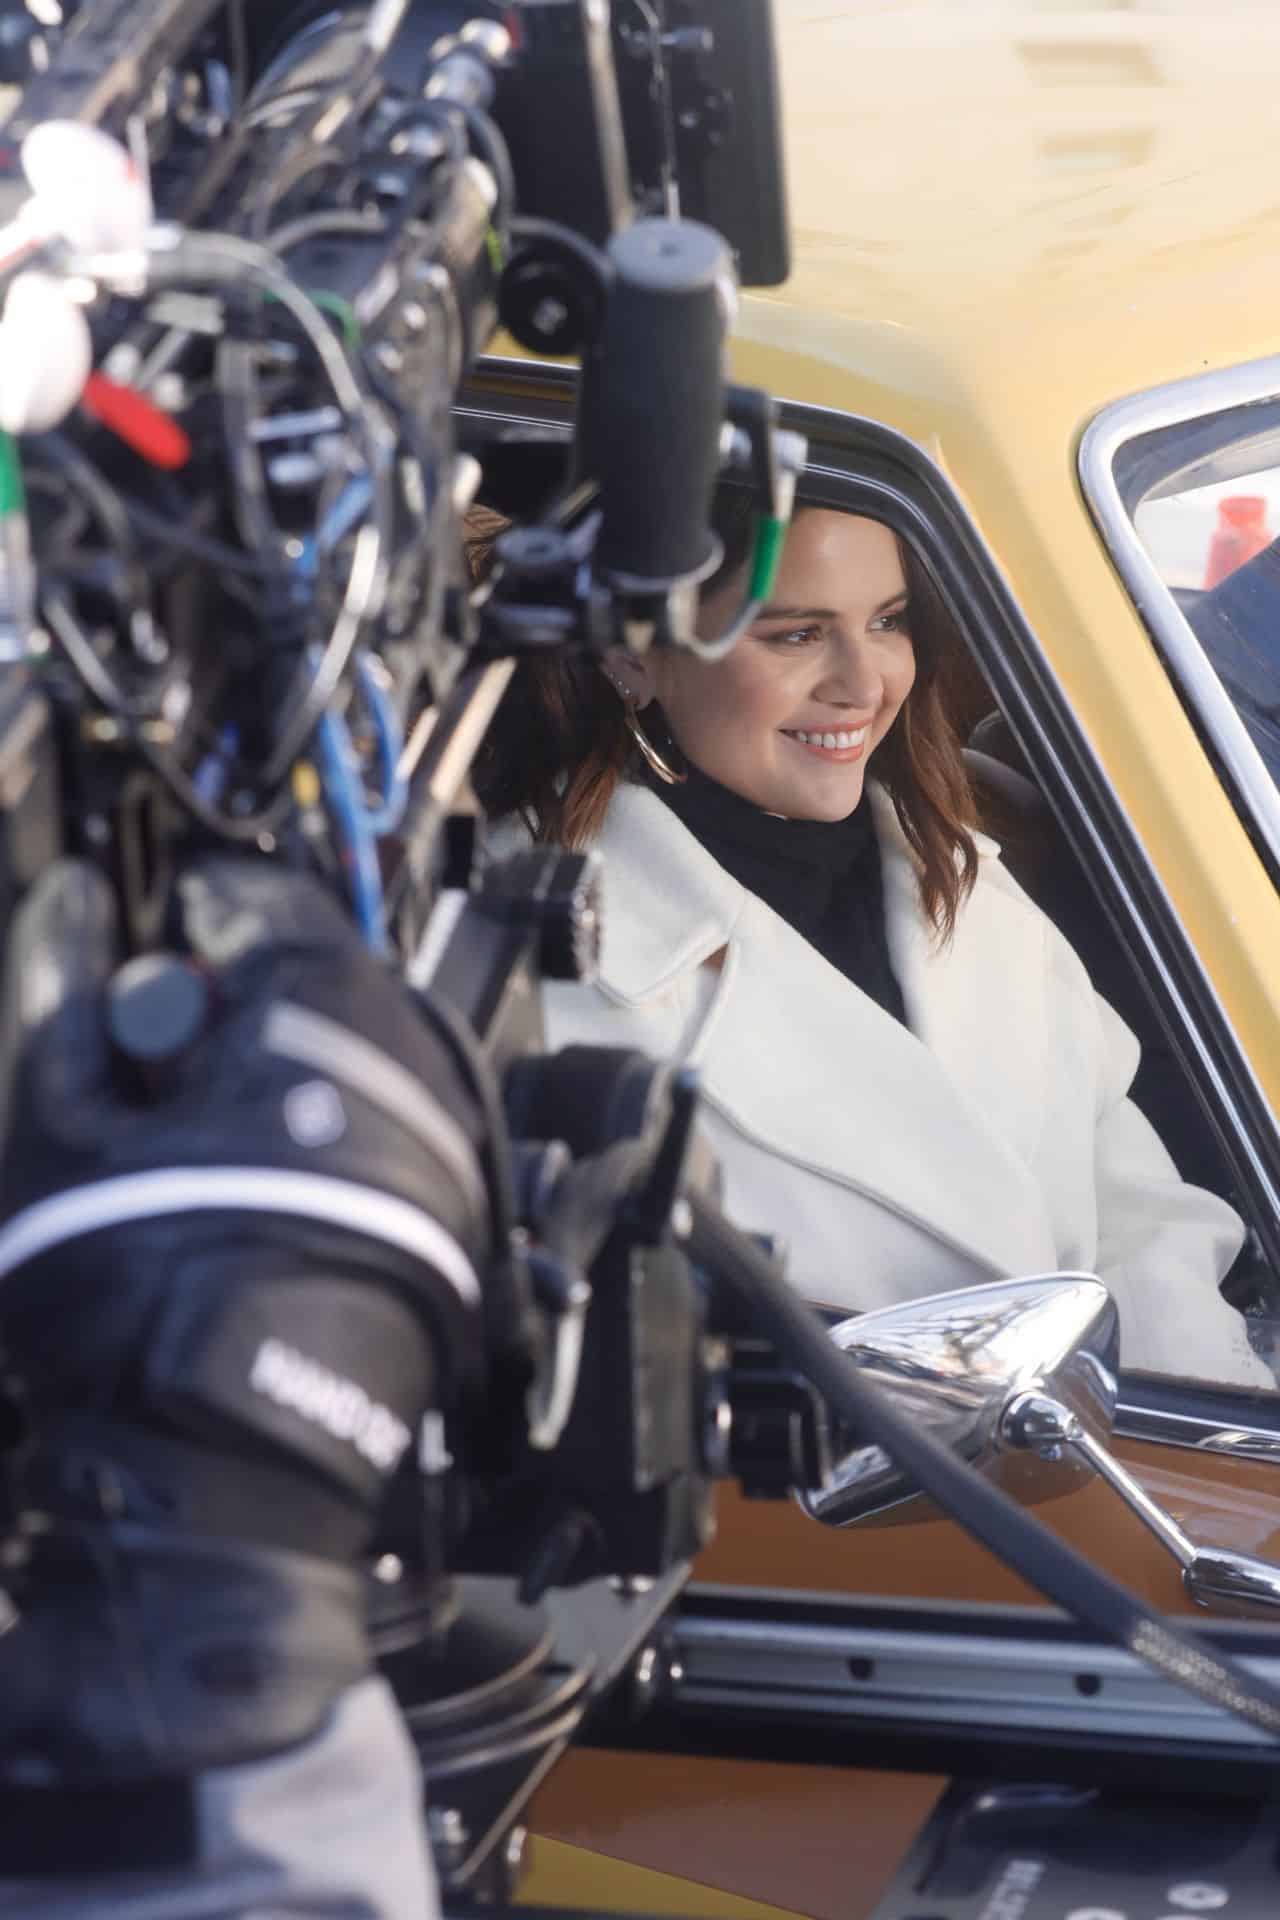 Selena Gomez Wore a White Coat During the Amusing Scene in the Car in OMITB